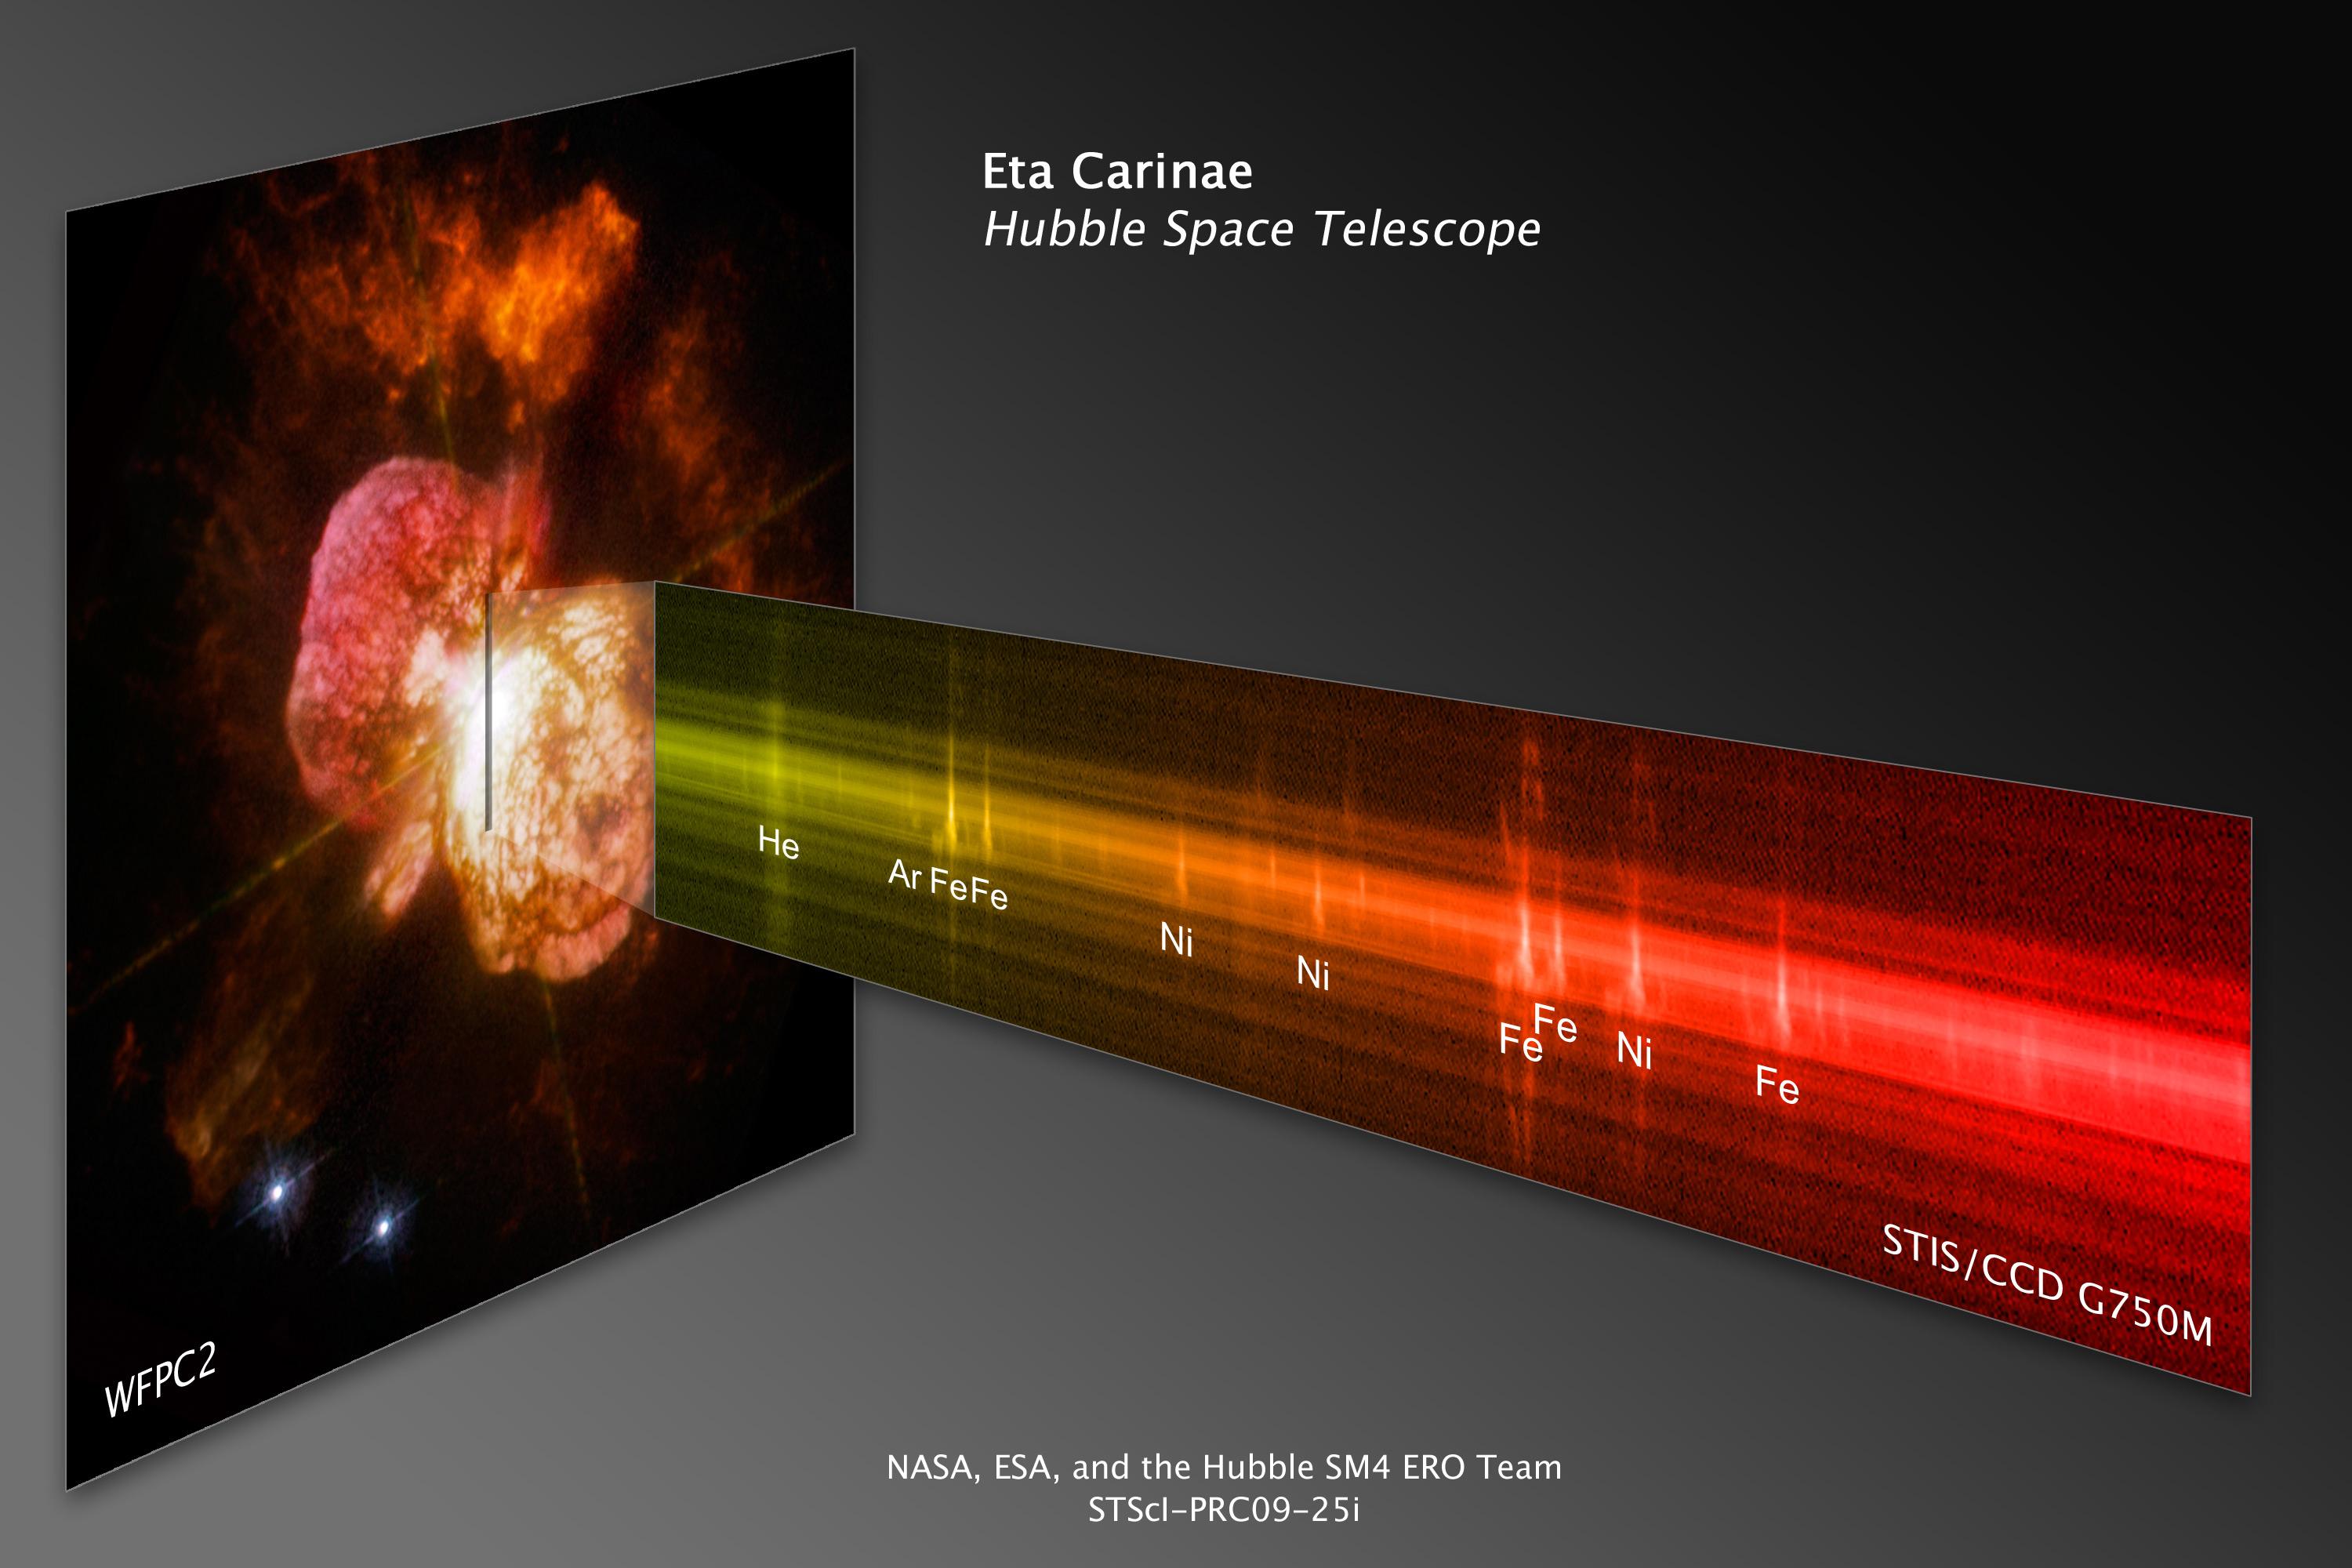 Against a gray background, an image of the star Eta Carinae is on the left. A horizontal row representing its spectrum extends out of it and to the right.